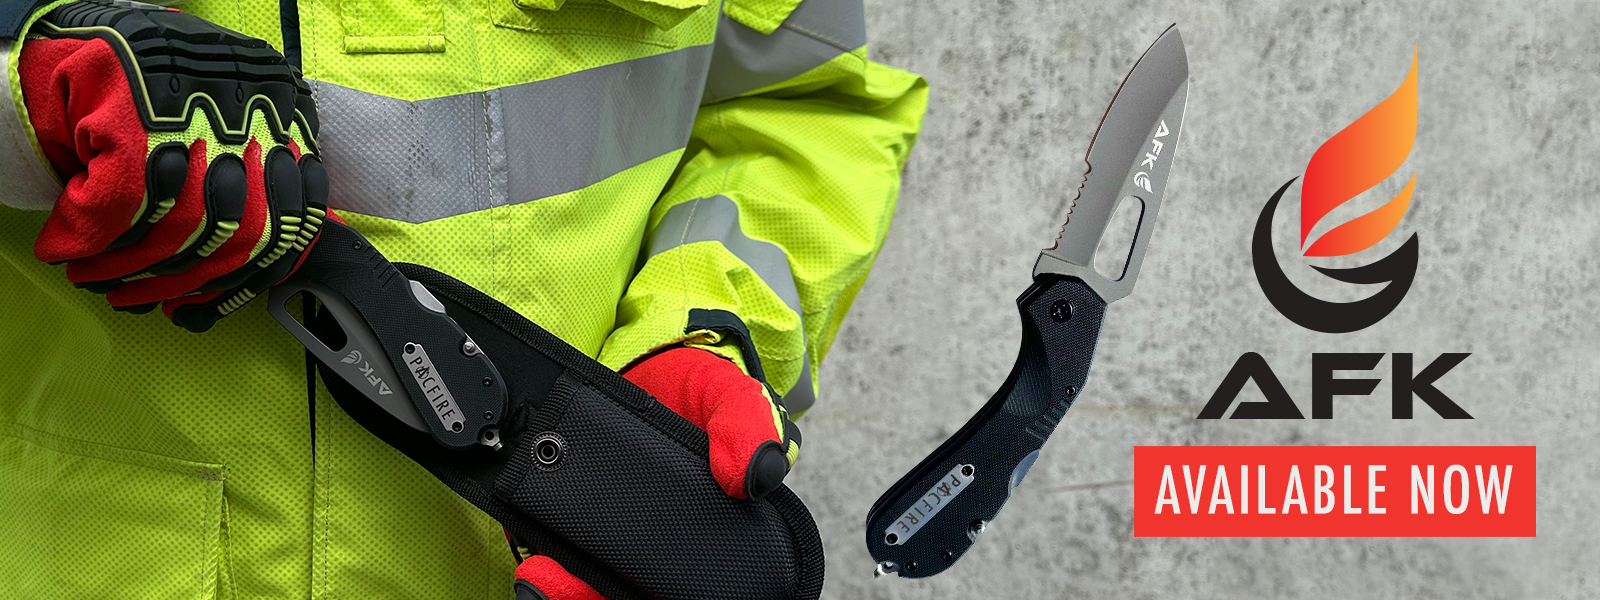 AFK folding knife now available from Pac Fire - view our range.